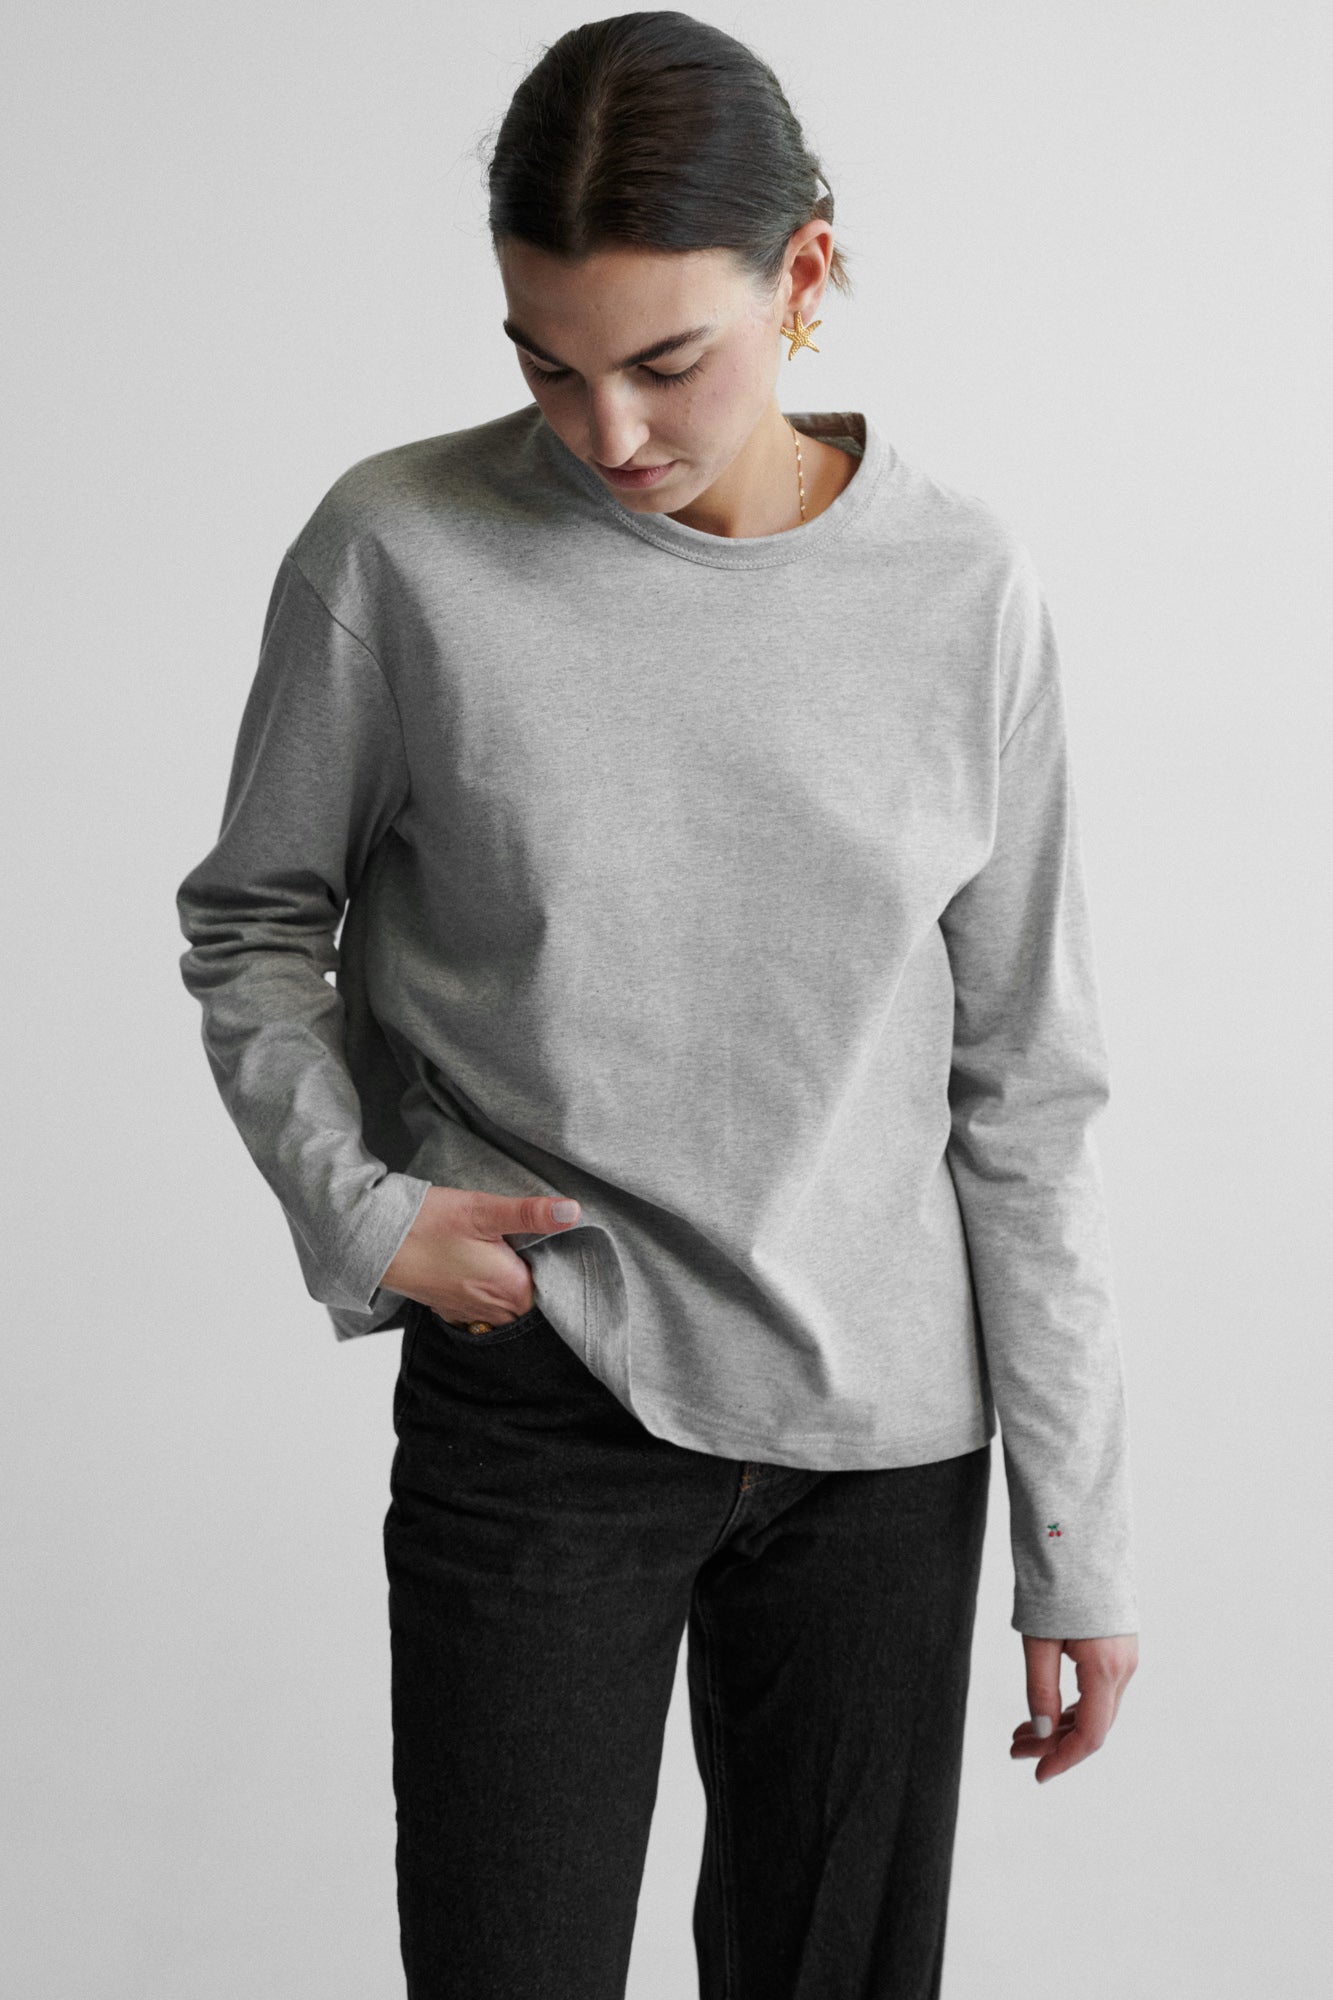 Longsleeve in cotton / 14 / 20 / mist grey ?The model is 178 cm tall and wears size XS/S?